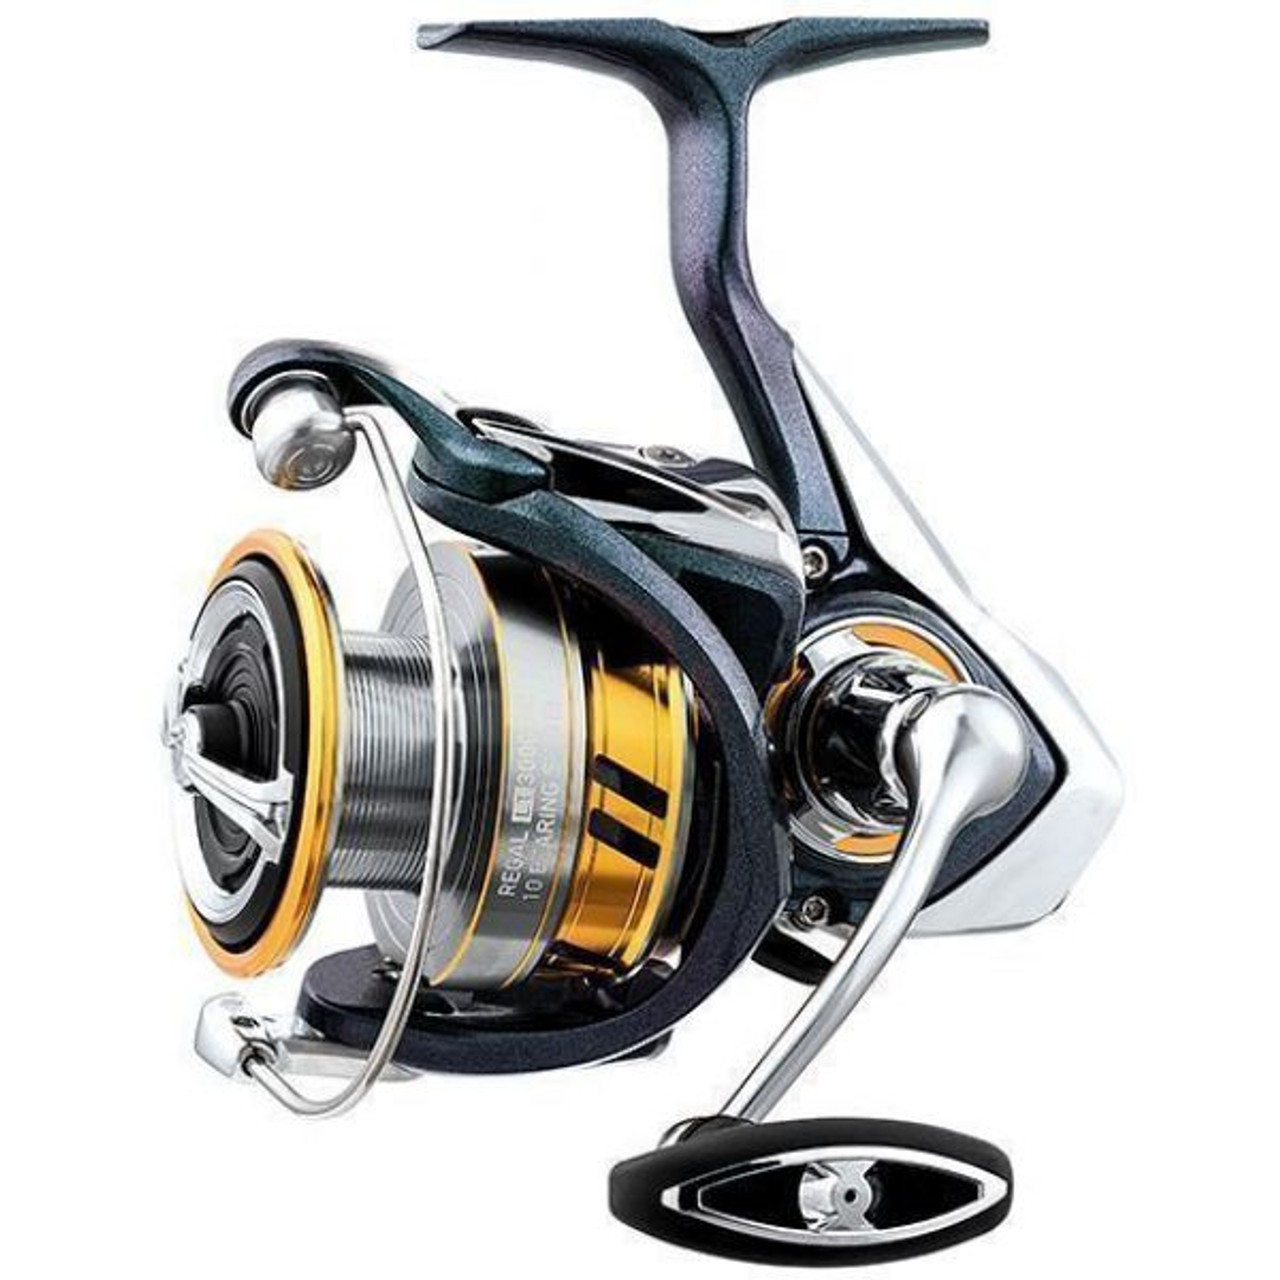 Daiwa Regal LT Spinning Reel, 3000 Size, 5,2:1 Ratio, 9BB, Clam Pack